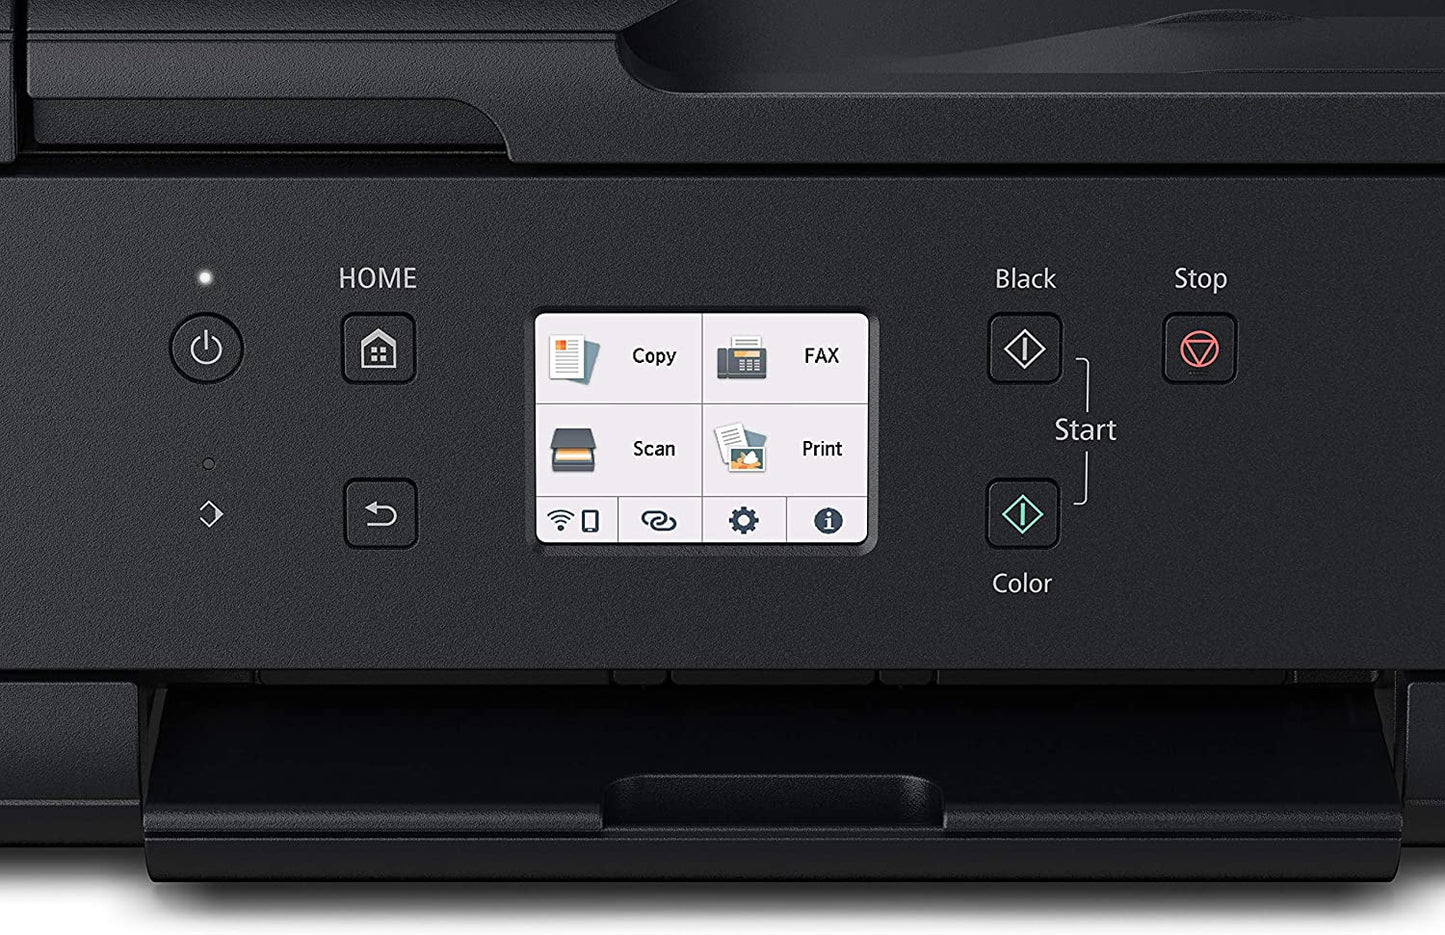 Canon Pixma TR7620 Wireless Home Ofﬁce All-in-One Inkjet Printer with ADF Black - Refurbished